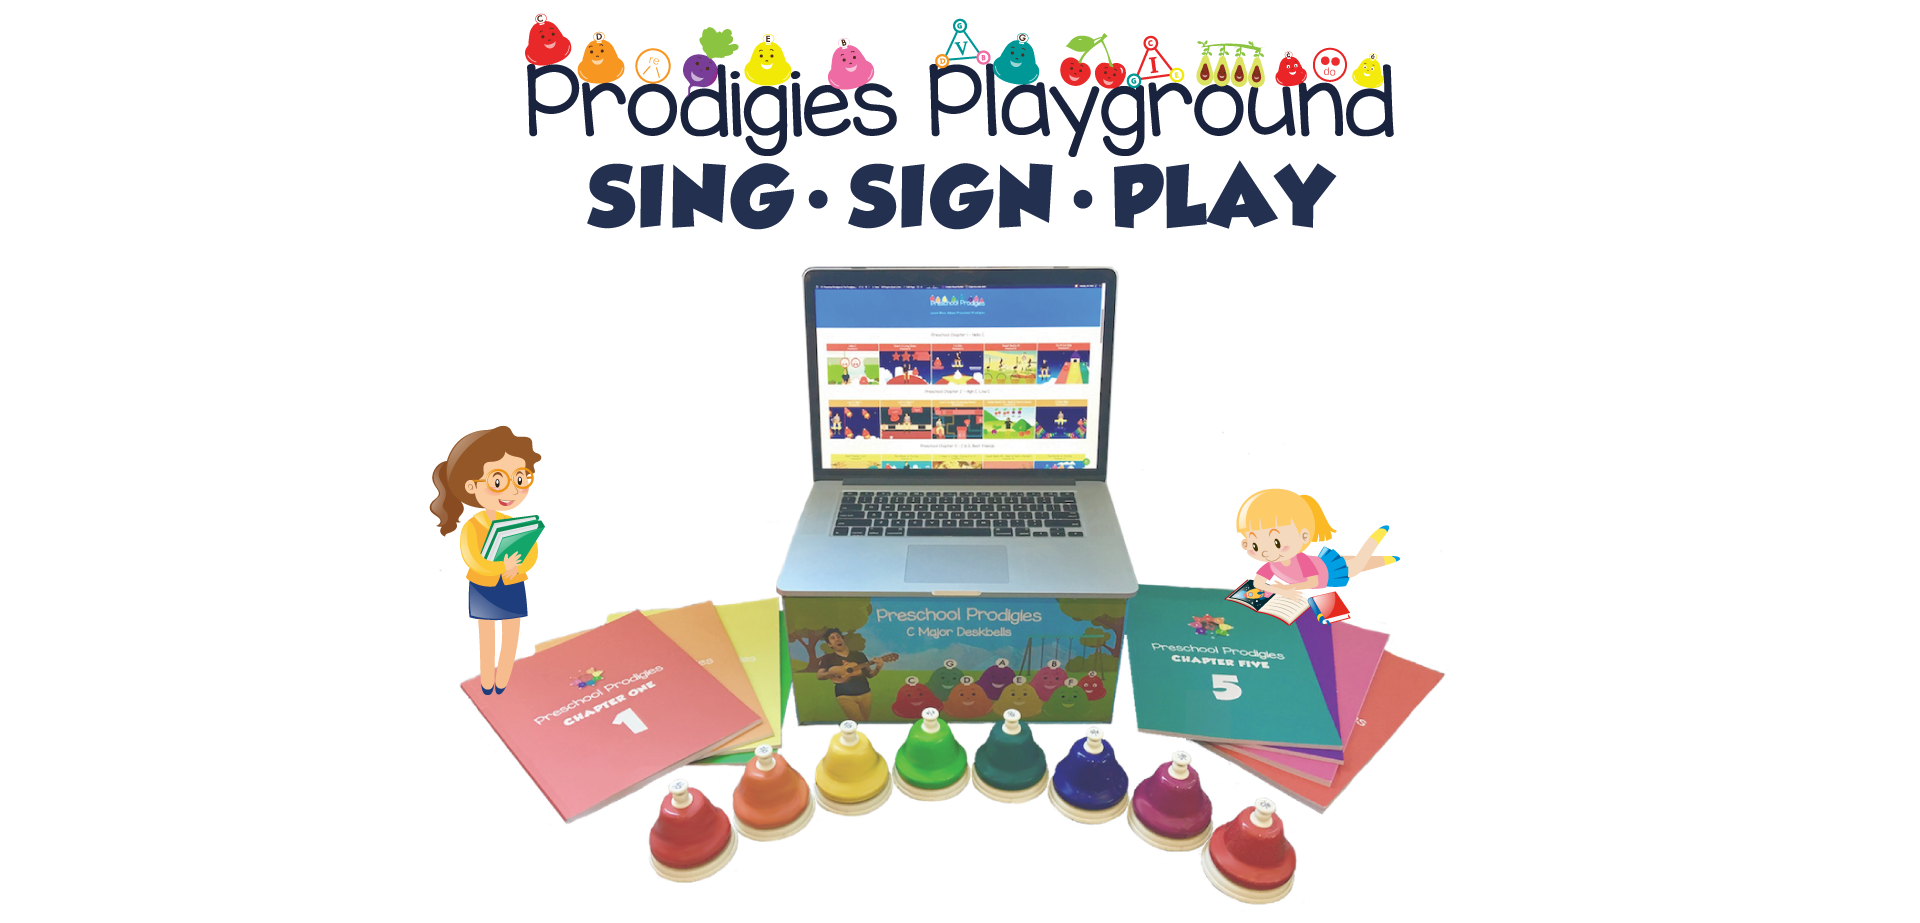 Copy of Sing-Sign-Play.png